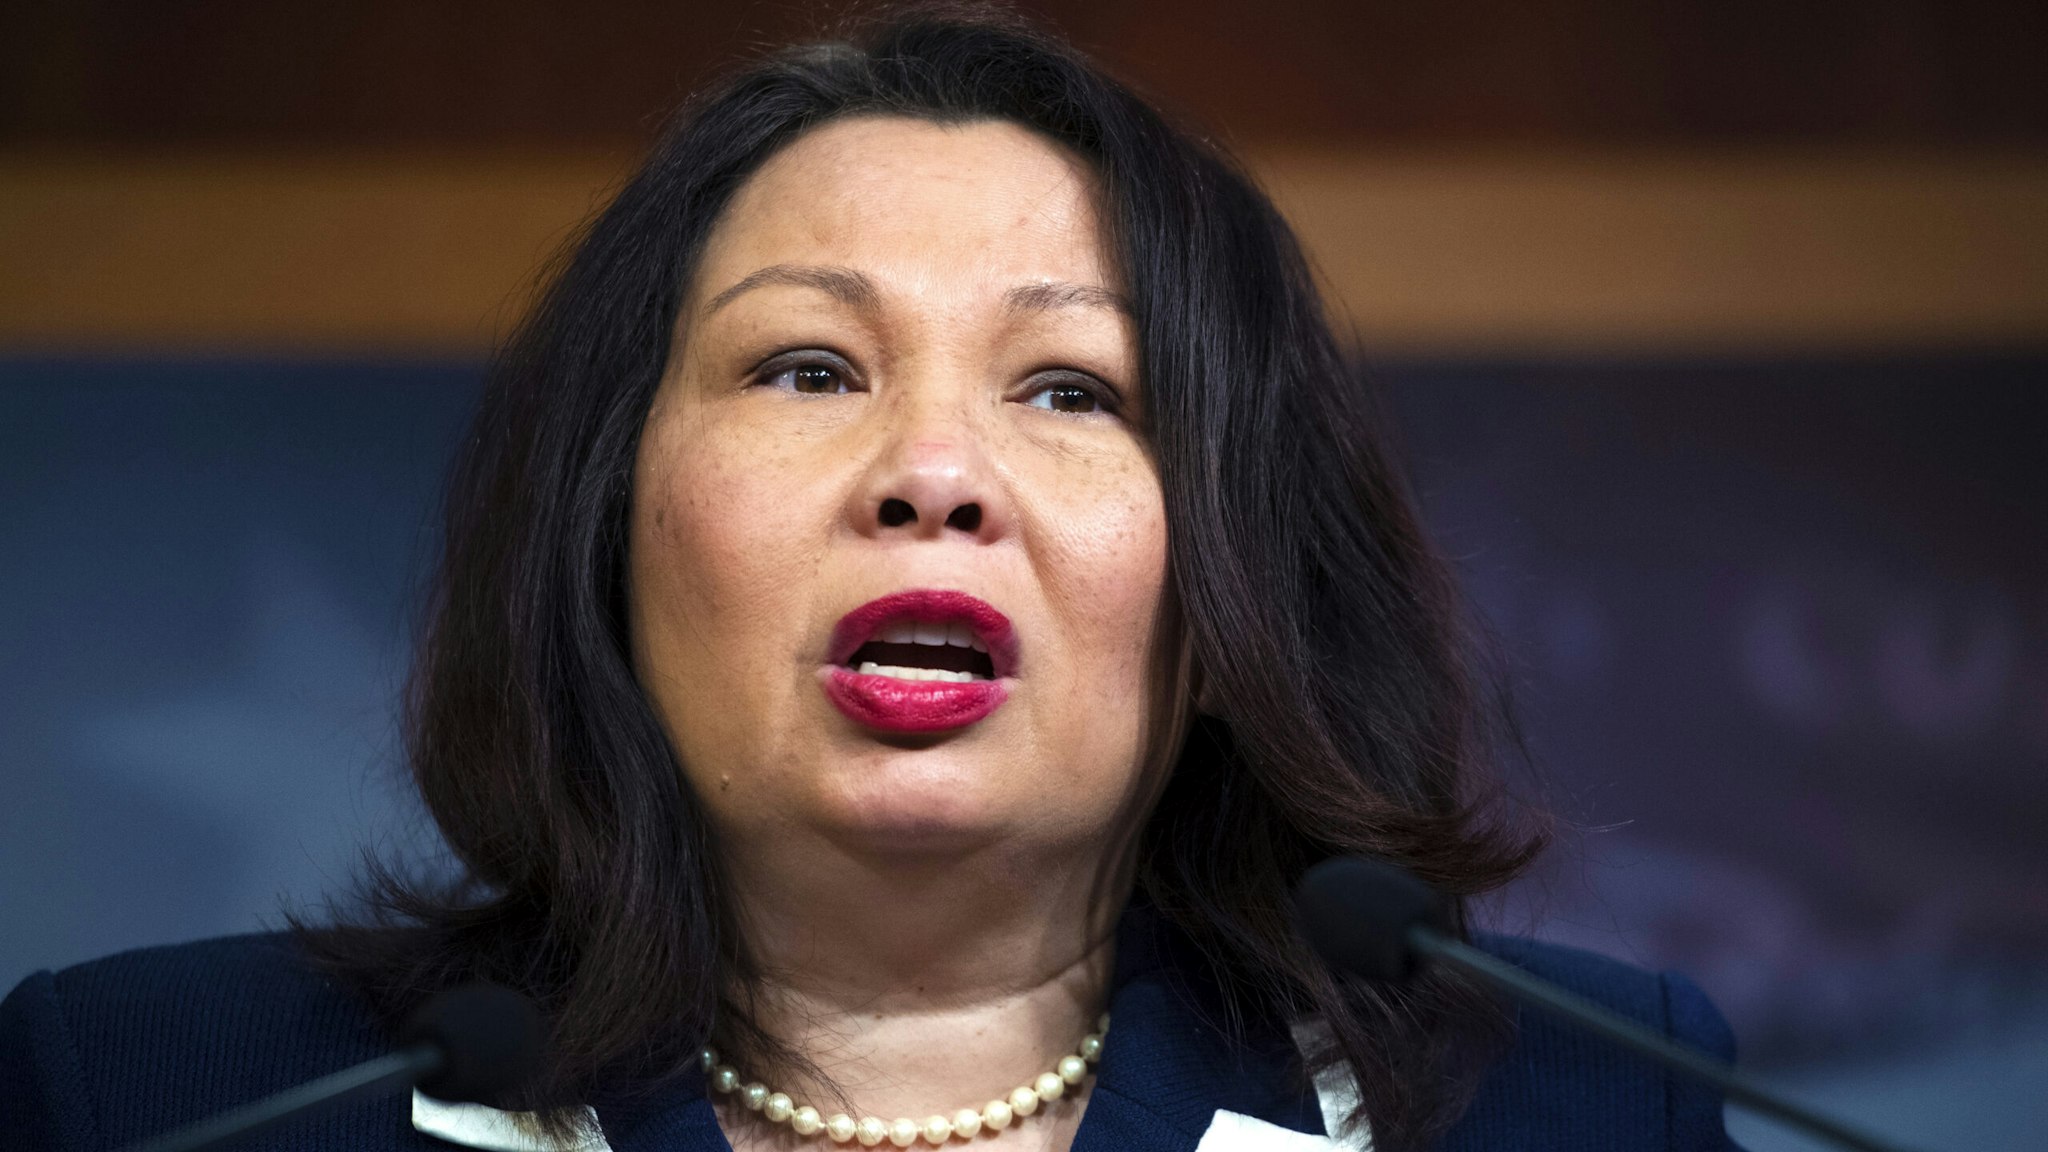 UNITED STATES - JANUARY 25: Sen. Tammy Duckworth, D-Ill., conducts a news conference in the Capitol after the Senate adjourned for the day the impeachment trial of President Donald Trump on Saturday, January 25, 2020.